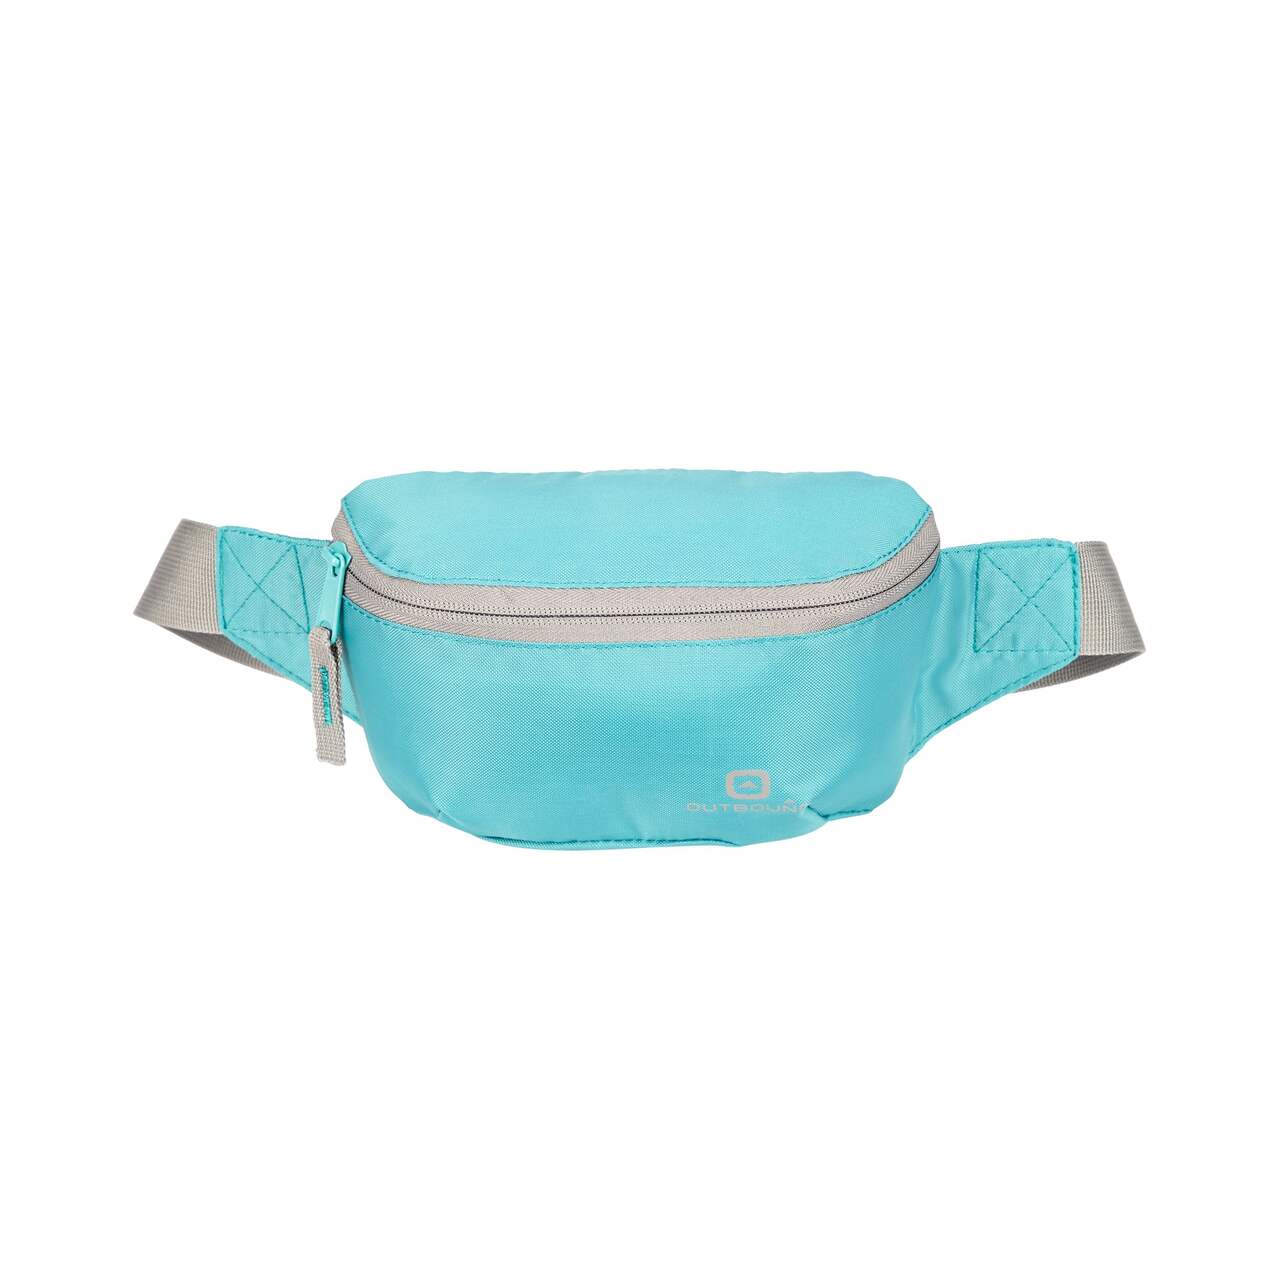  Fanny Packs for Women Fashion Leather Fanny Pack for Men Girls  Boys, Plus Size Waist Pack Belt Bag with Adjustable Strap Waterproof Cute  Bum Hip Bags for Travel Disney Hiking Running